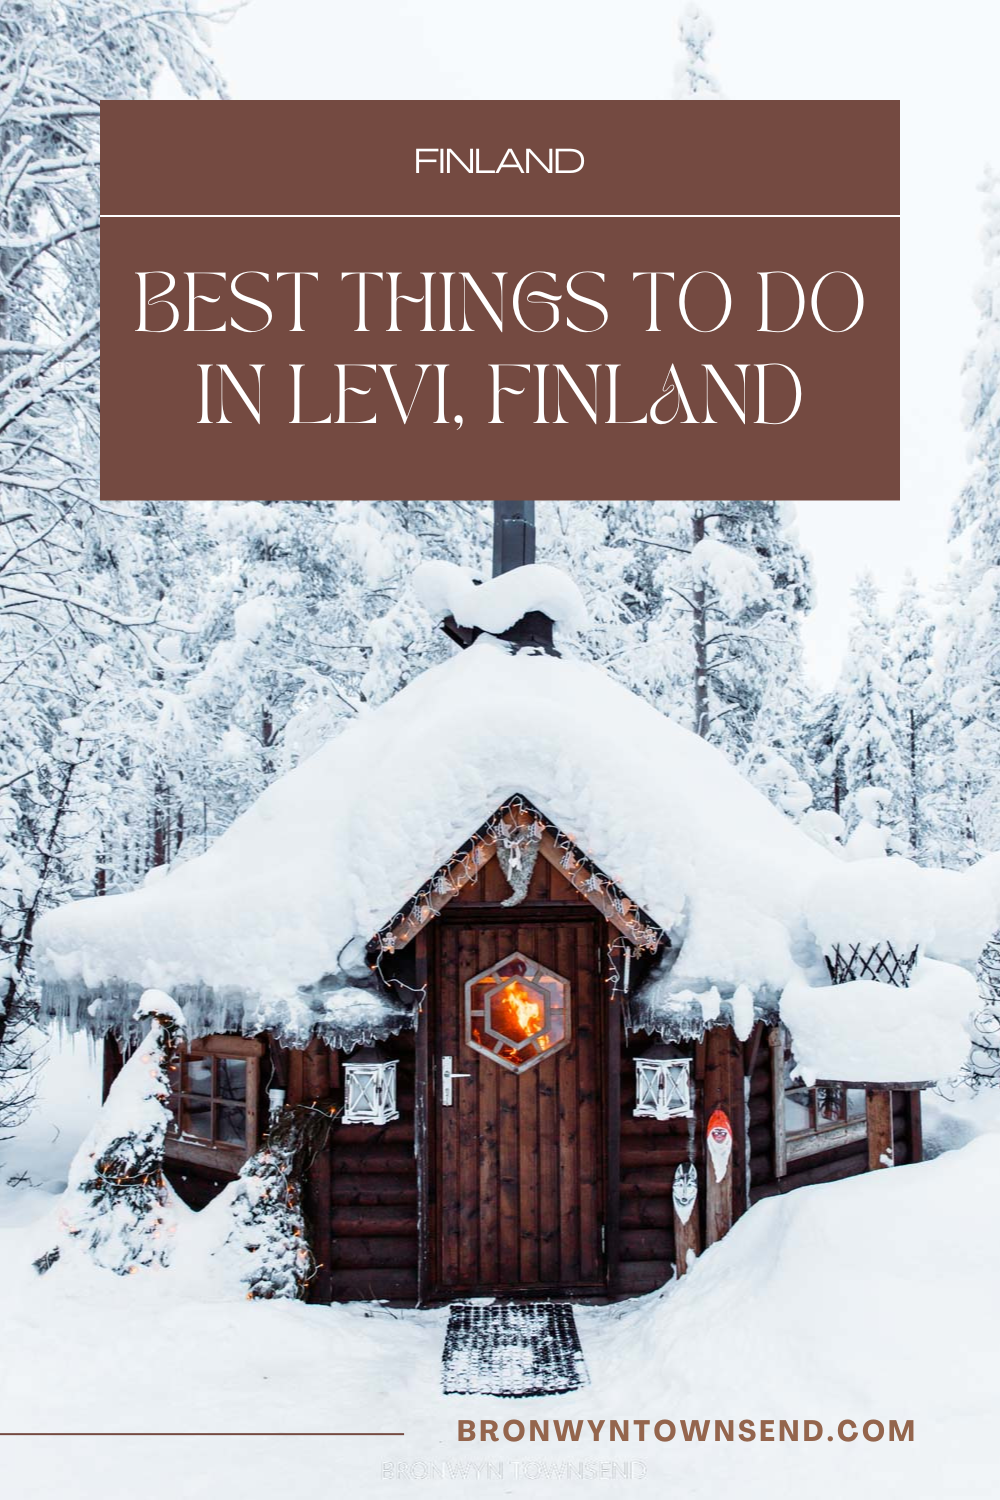 polet kollidere olie 11 Things to do in Levi, Finland in winter